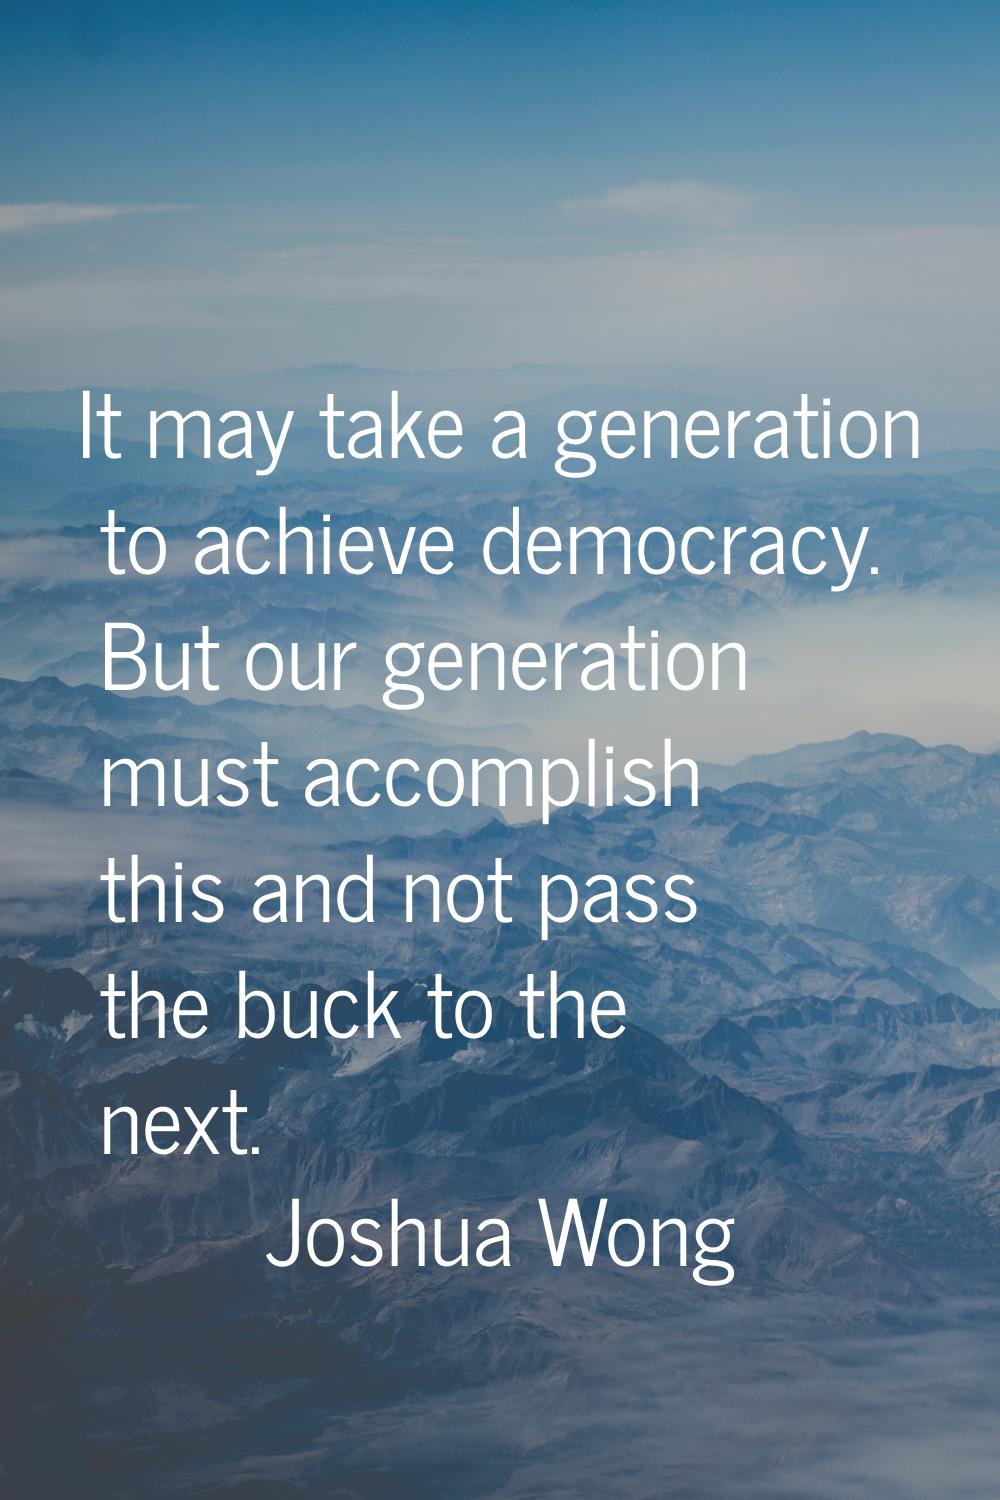 It may take a generation to achieve democracy. But our generation must accomplish this and not pass